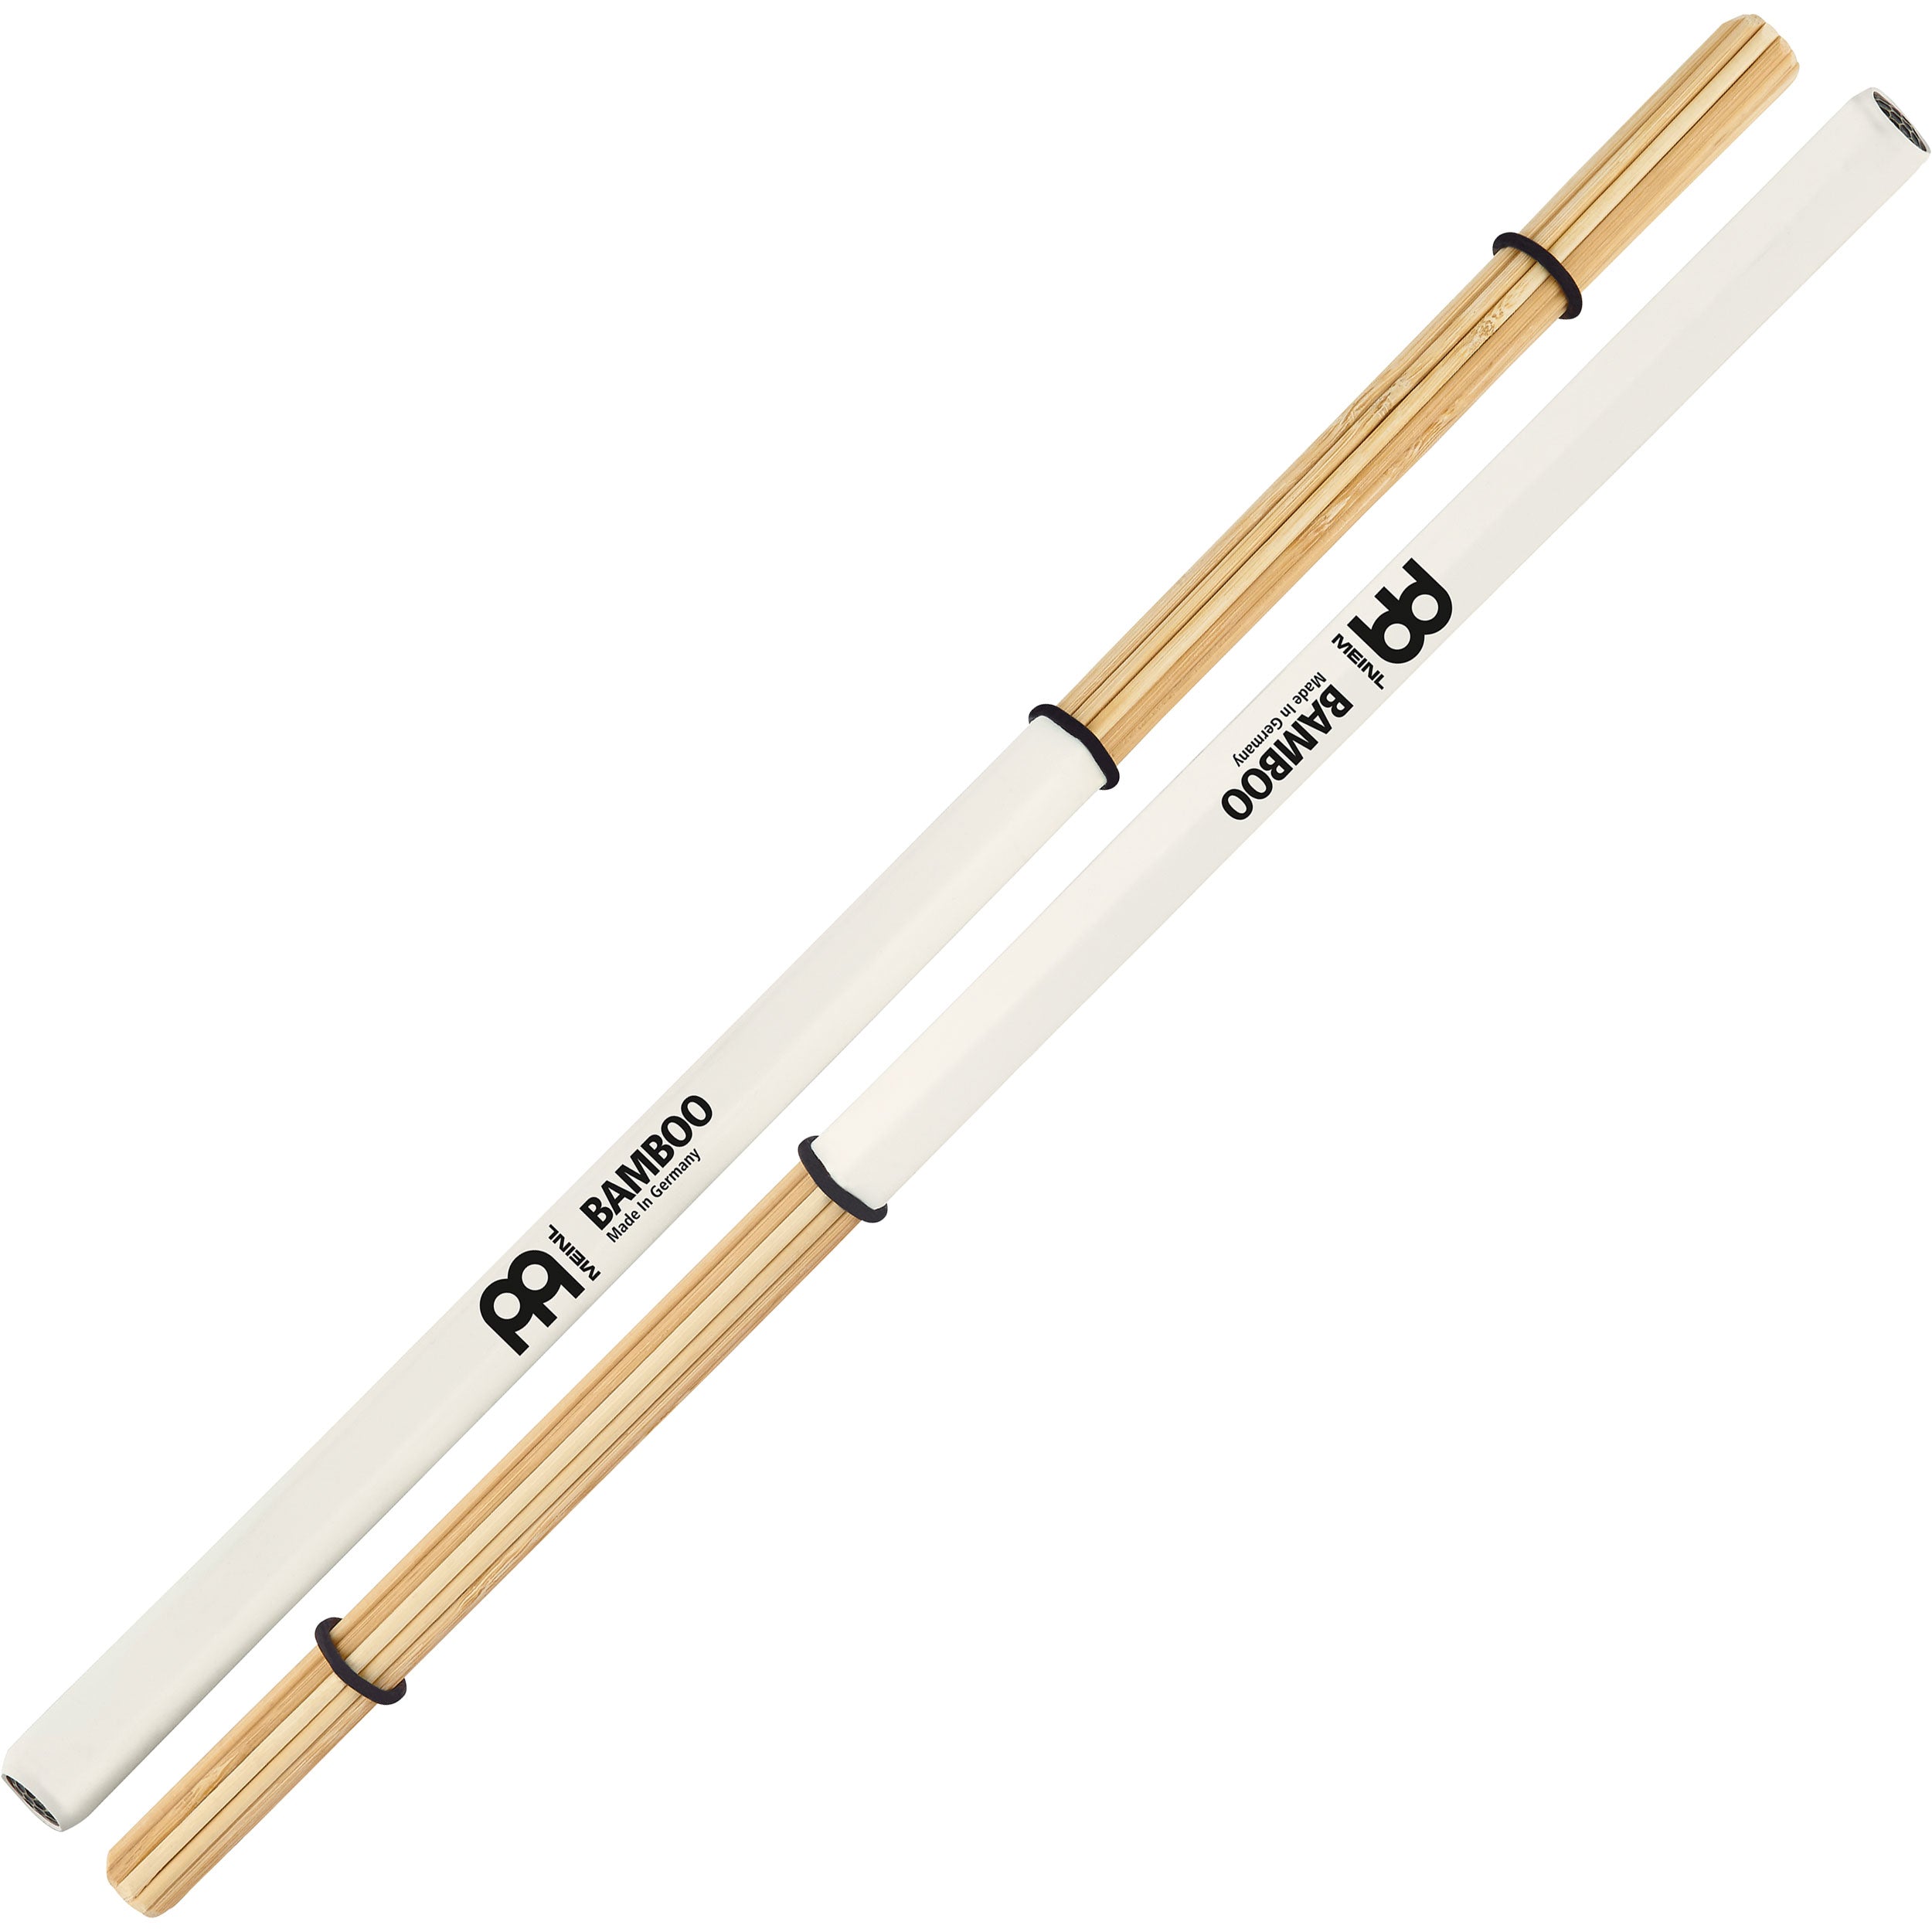 Meinl Bamboo Multi-Sticks With Extra-Long Grip